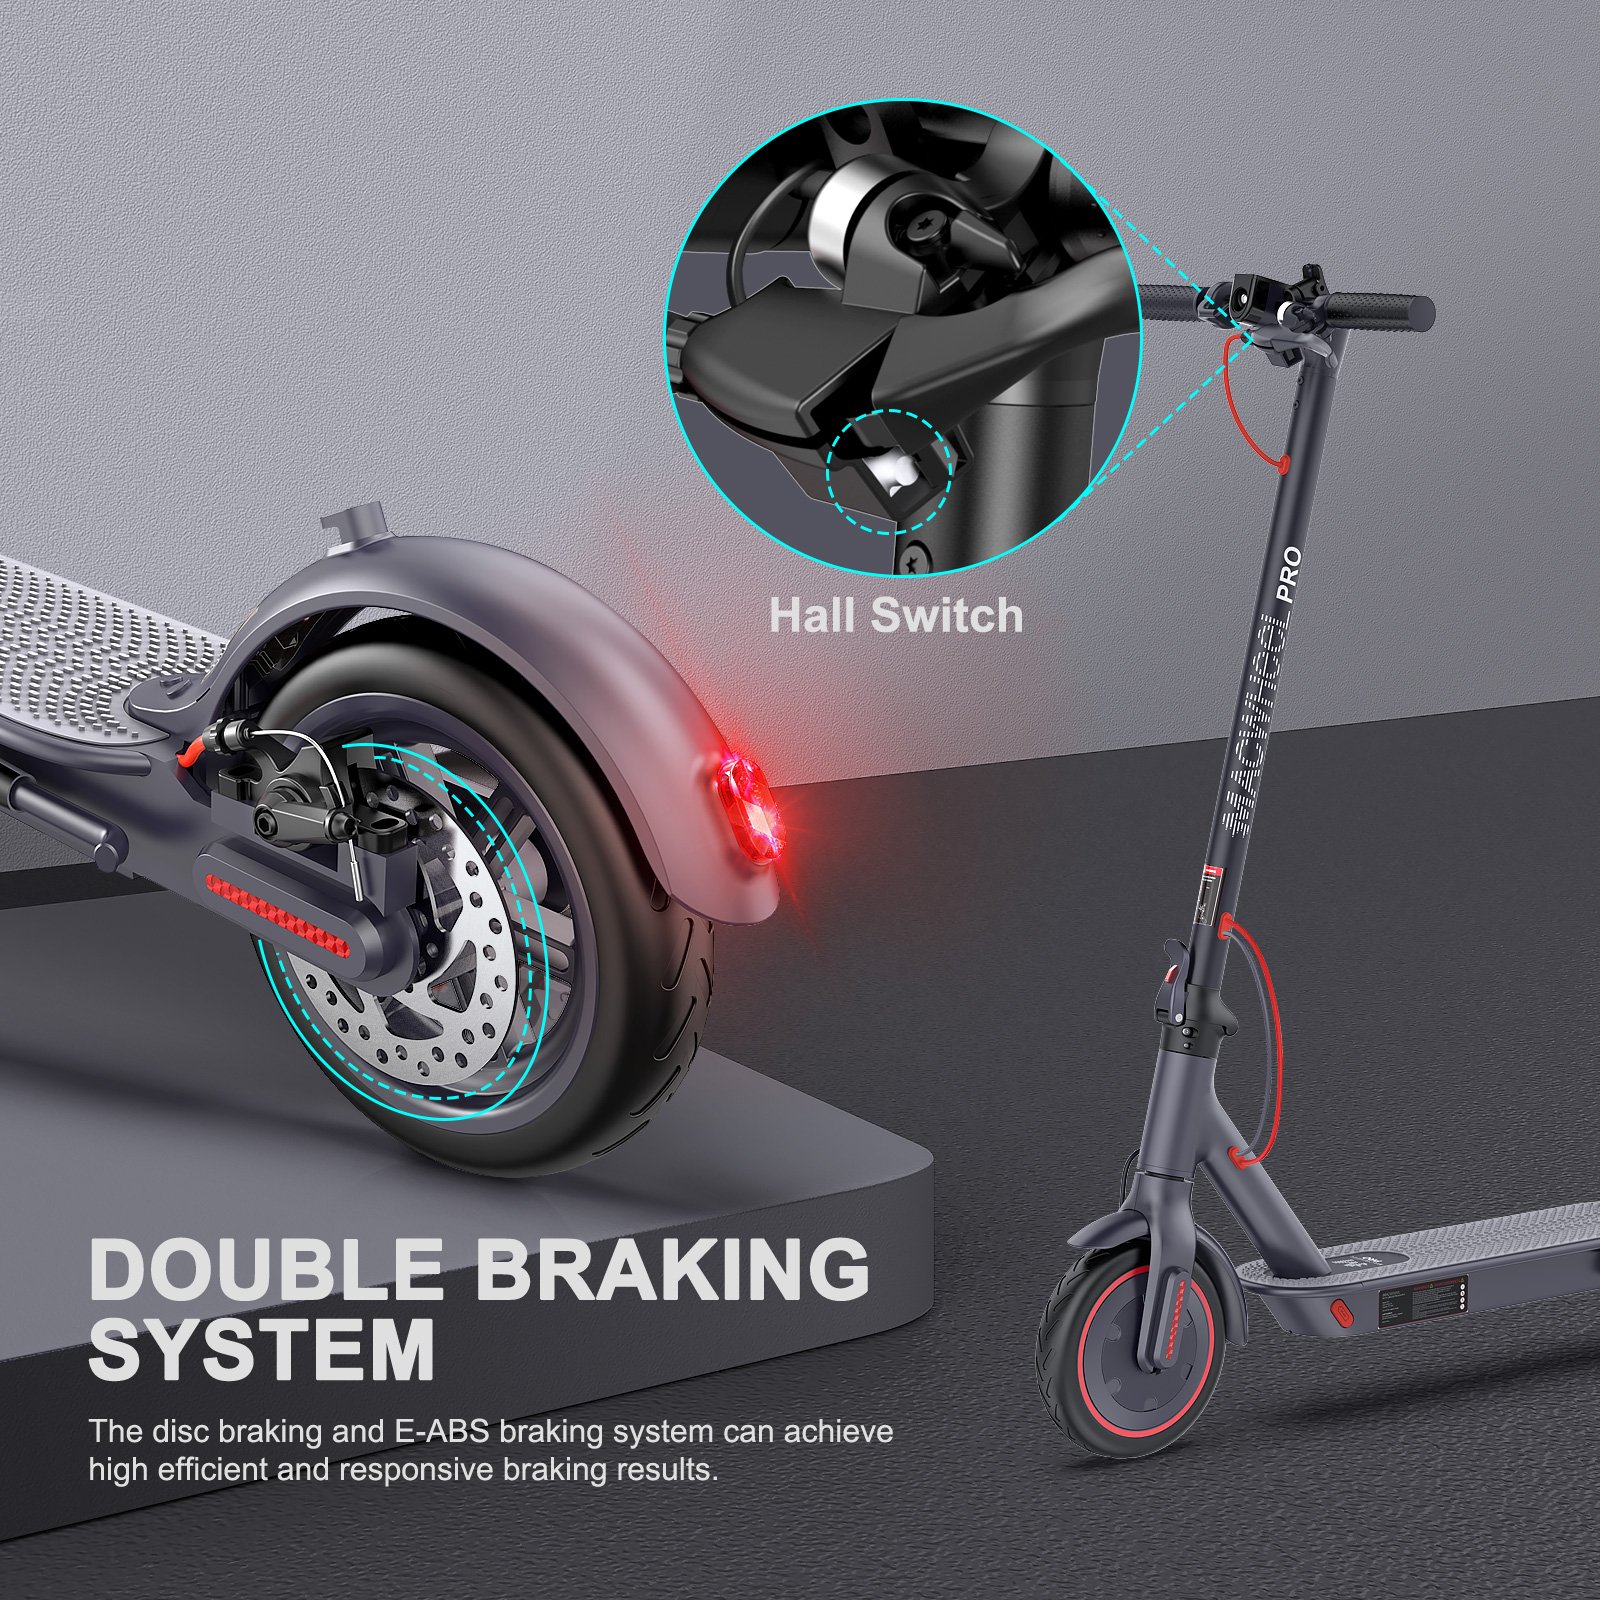 Macwheel MX PRO Electric Scooter, Max Speed 15.5MPH, Max Range 25 Miles, Foldable, Dual Braking, for Adults - image 3 of 7